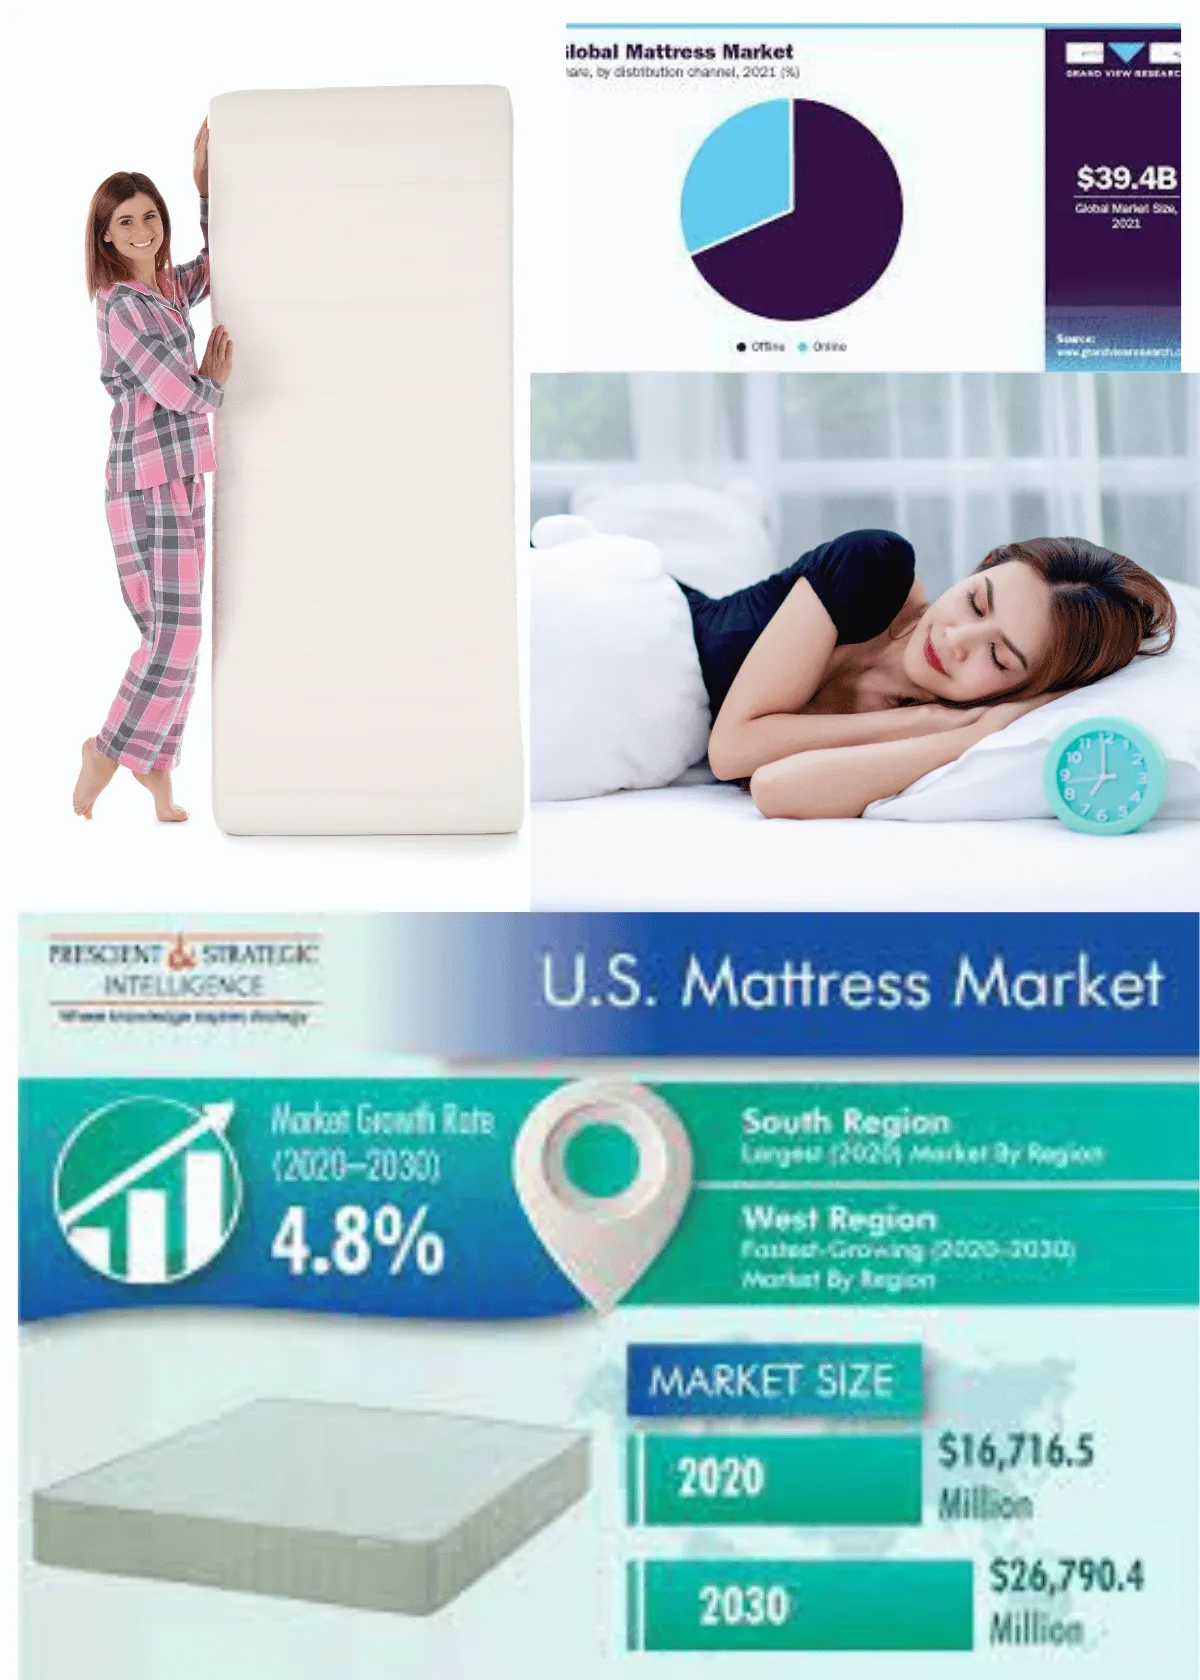 "Trends and Innovations in the Sleep and Mattress Industry "